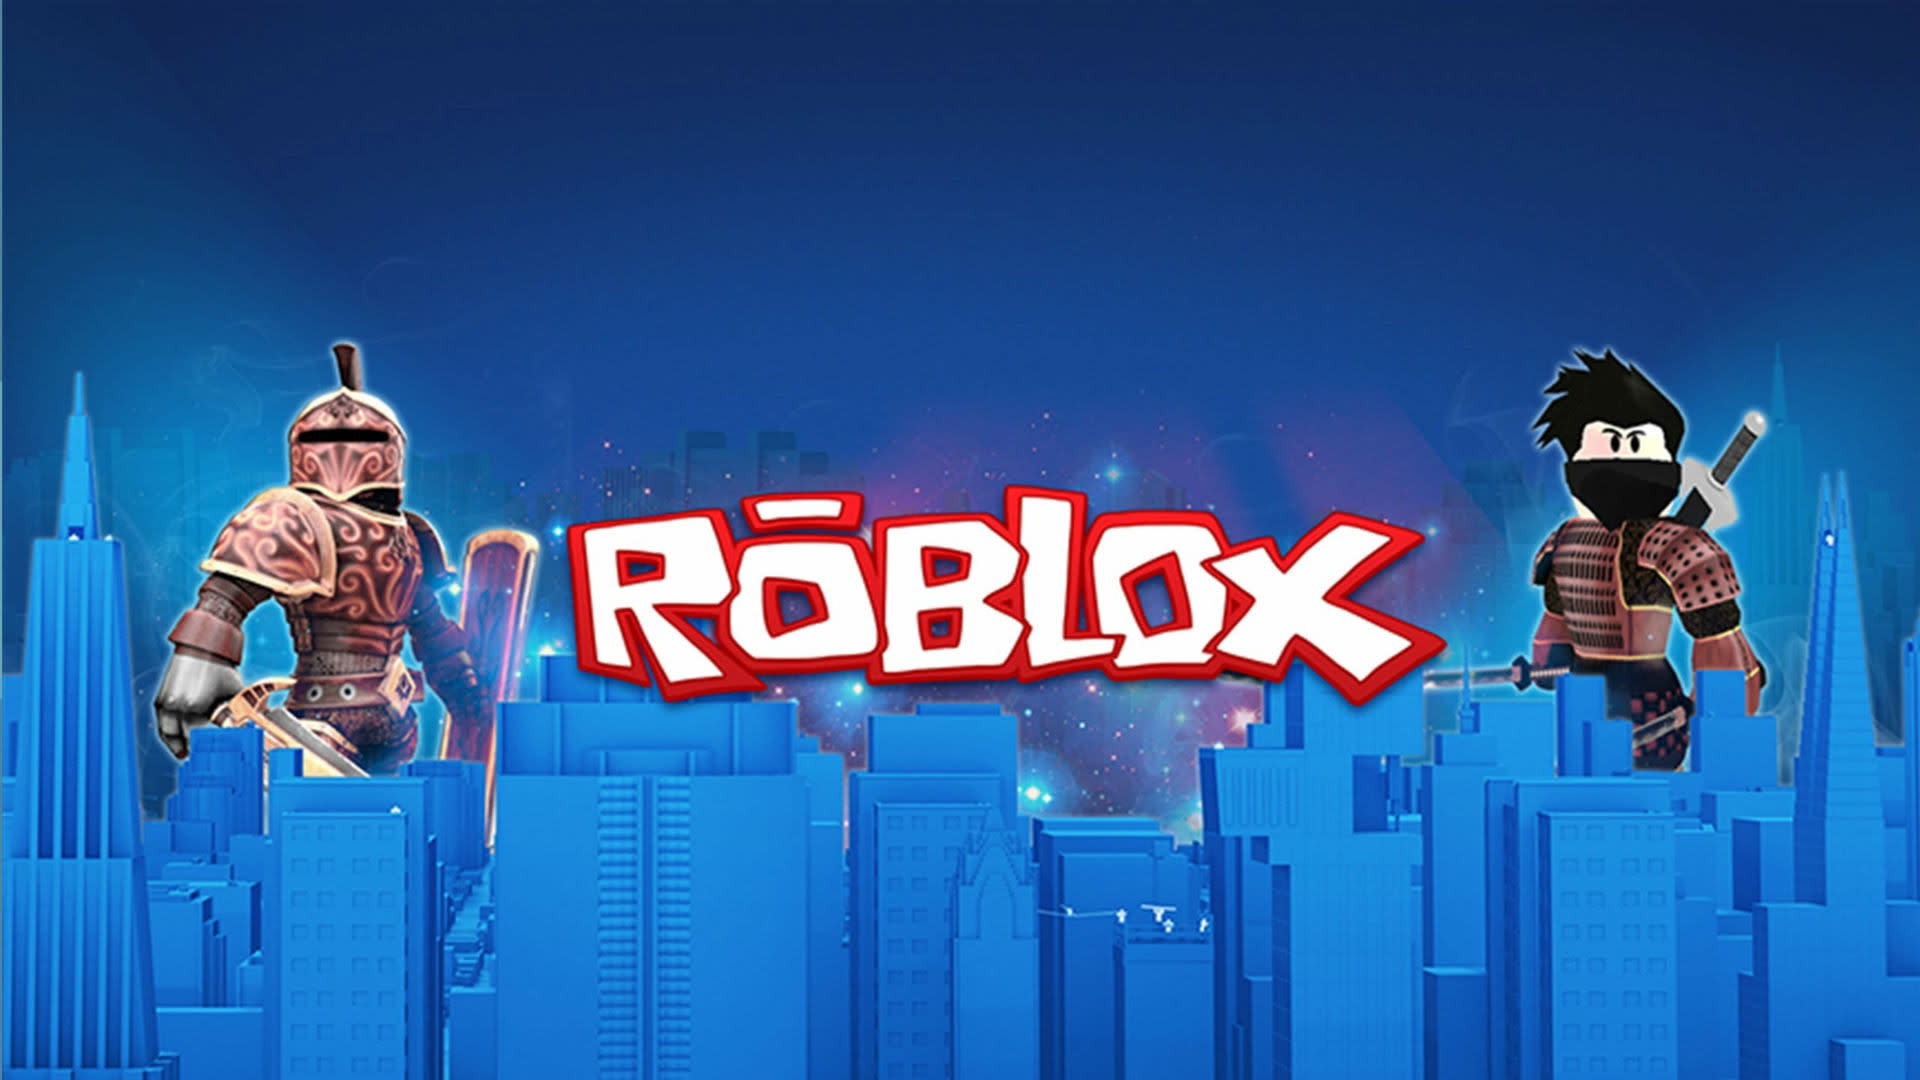 Roblox Enters Vr Space With Cross Platform Support - fade blue skybox hd roblox